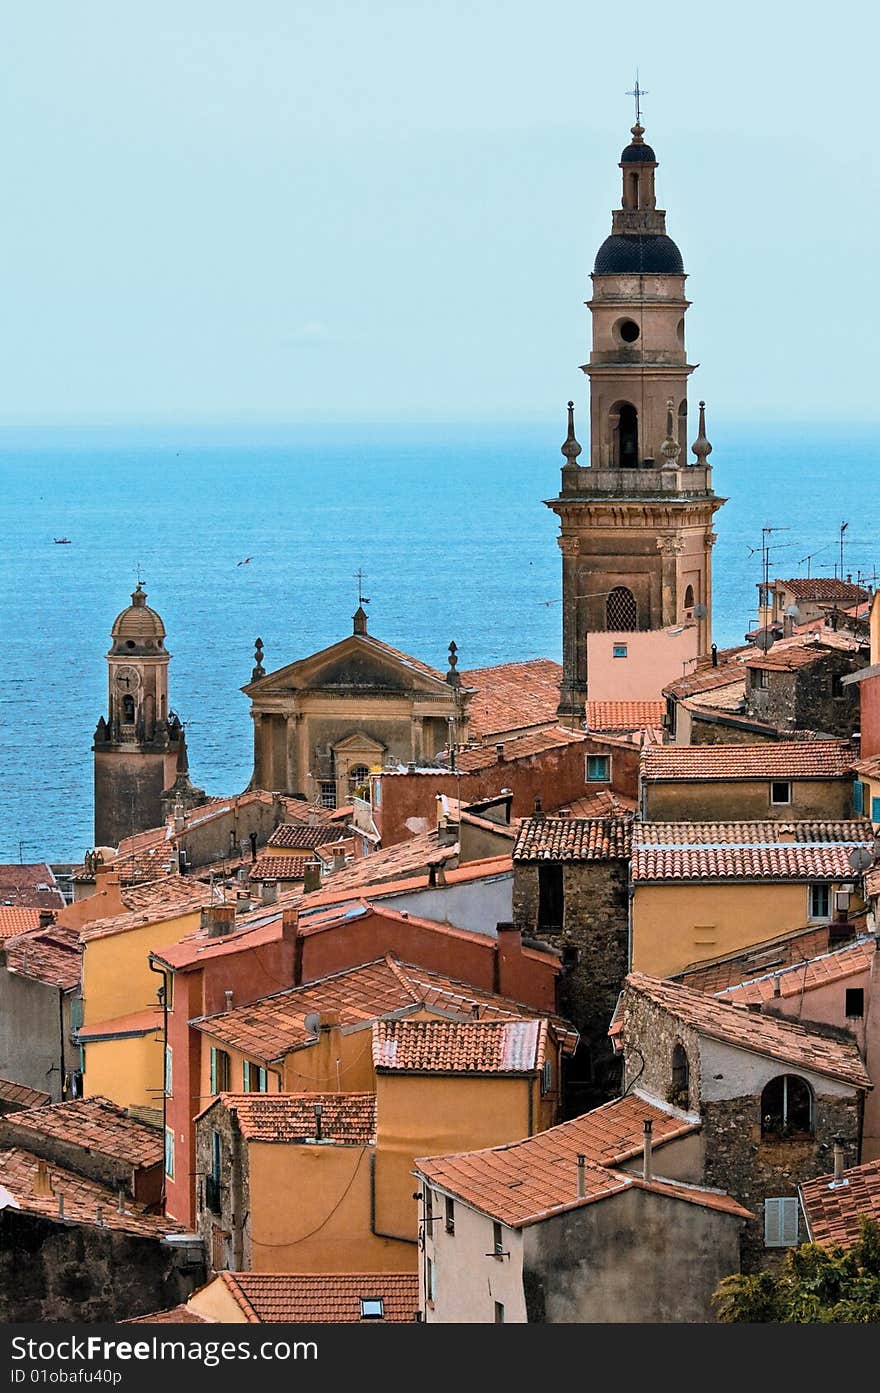 The typical village Menton in the French Riviera